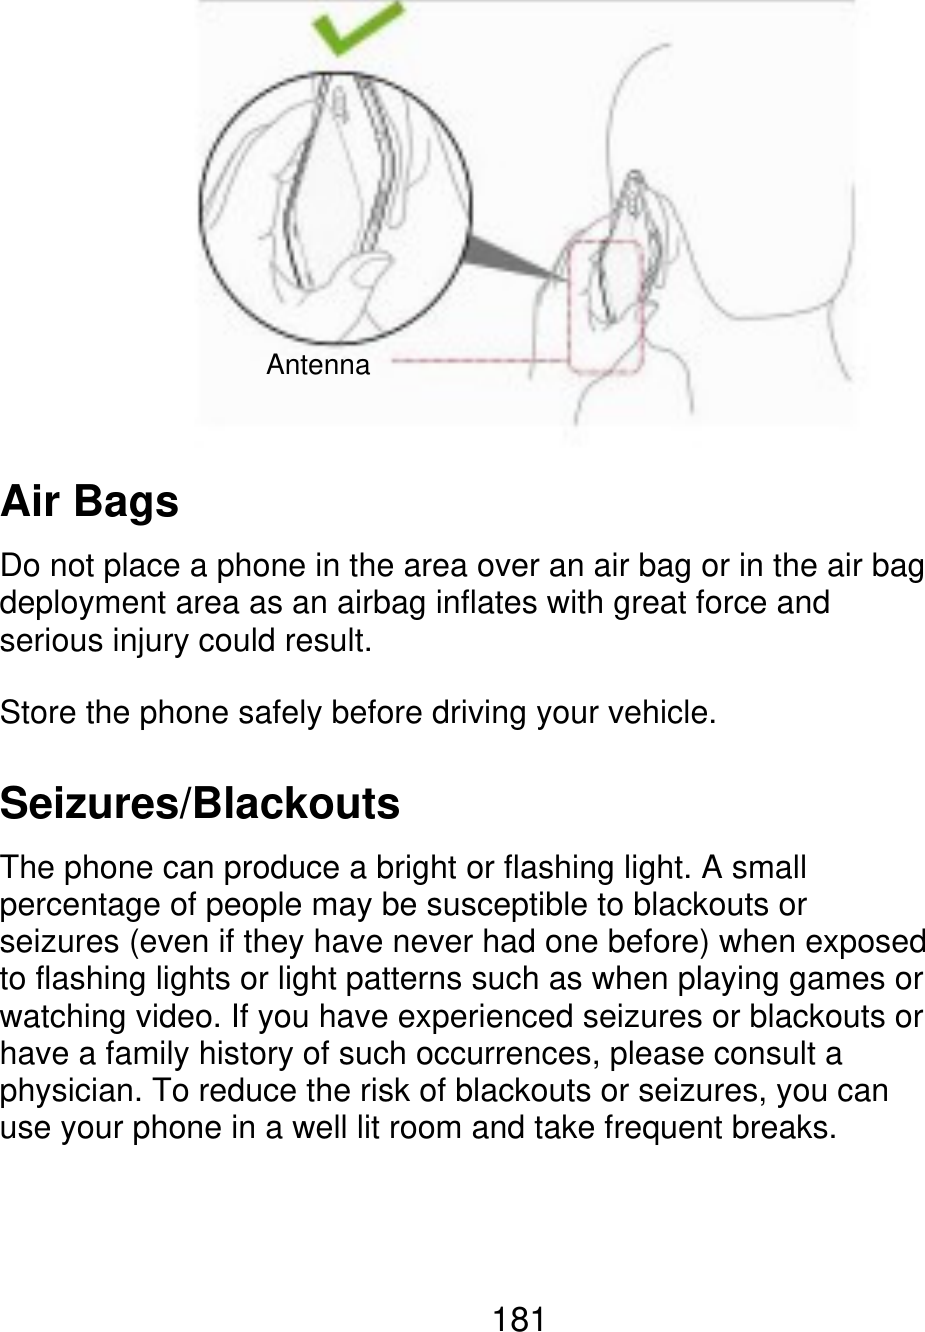 Antenna Air Bags Do not place a phone in the area over an air bag or in the air bag deployment area as an airbag inflates with great force and serious injury could result. Store the phone safely before driving your vehicle. Seizures/Blackouts The phone can produce a bright or flashing light. A small percentage of people may be susceptible to blackouts or seizures (even if they have never had one before) when exposed to flashing lights or light patterns such as when playing games or watching video. If you have experienced seizures or blackouts or have a family history of such occurrences, please consult a physician. To reduce the risk of blackouts or seizures, you can use your phone in a well lit room and take frequent breaks. 181 